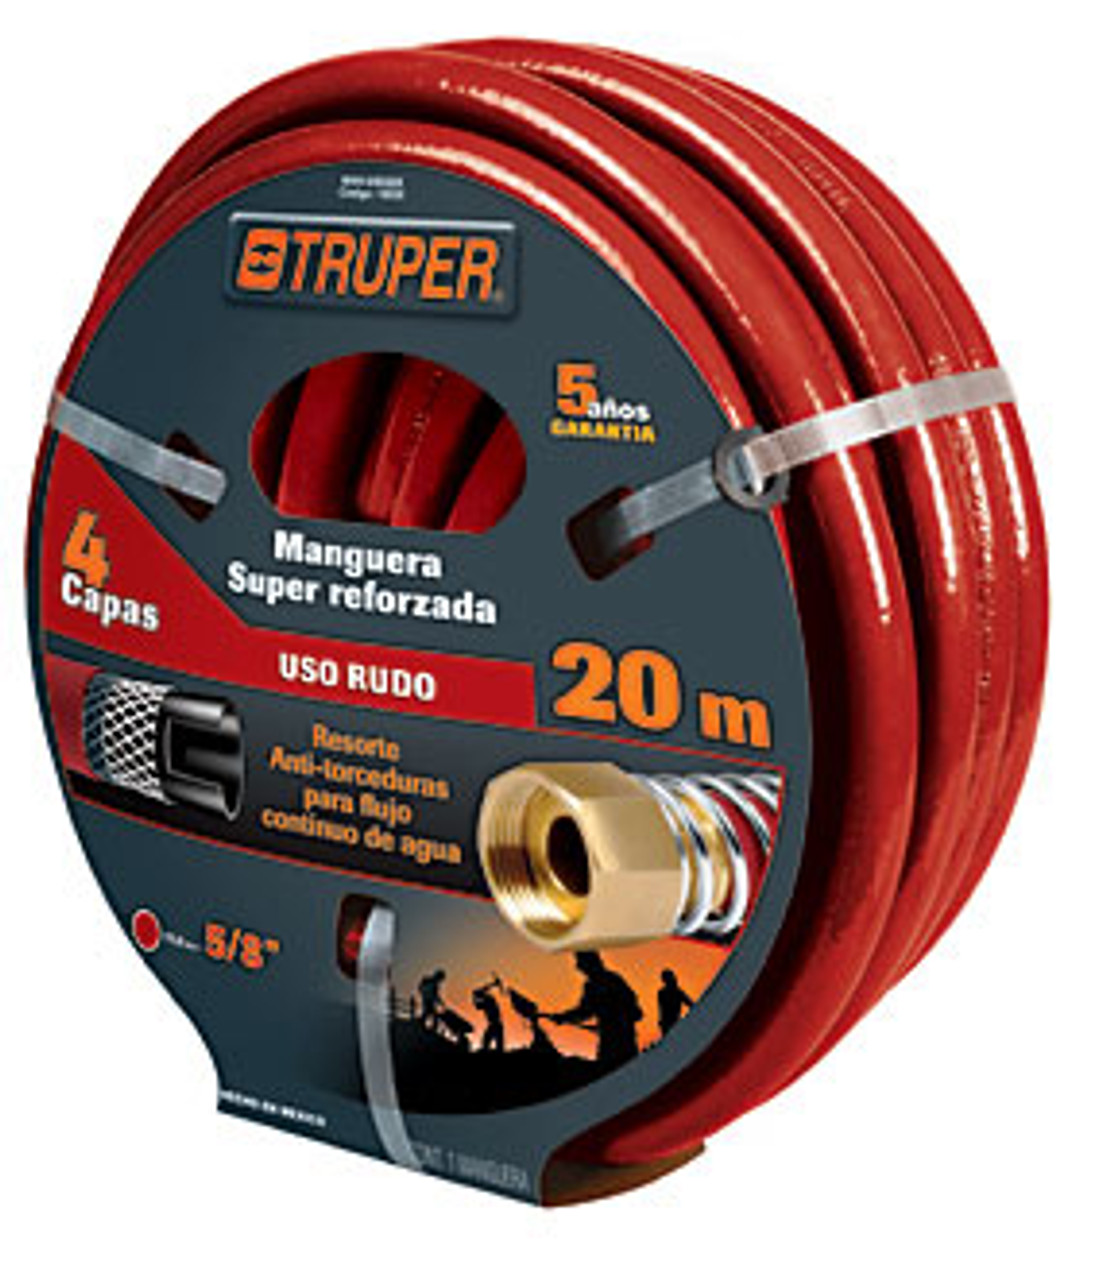 Truper 4-Ply Extra-Reinforced Hoses w/ Metal Couplings, 98 Ft 5/8" Reinforced 4 Ply Hose #16040